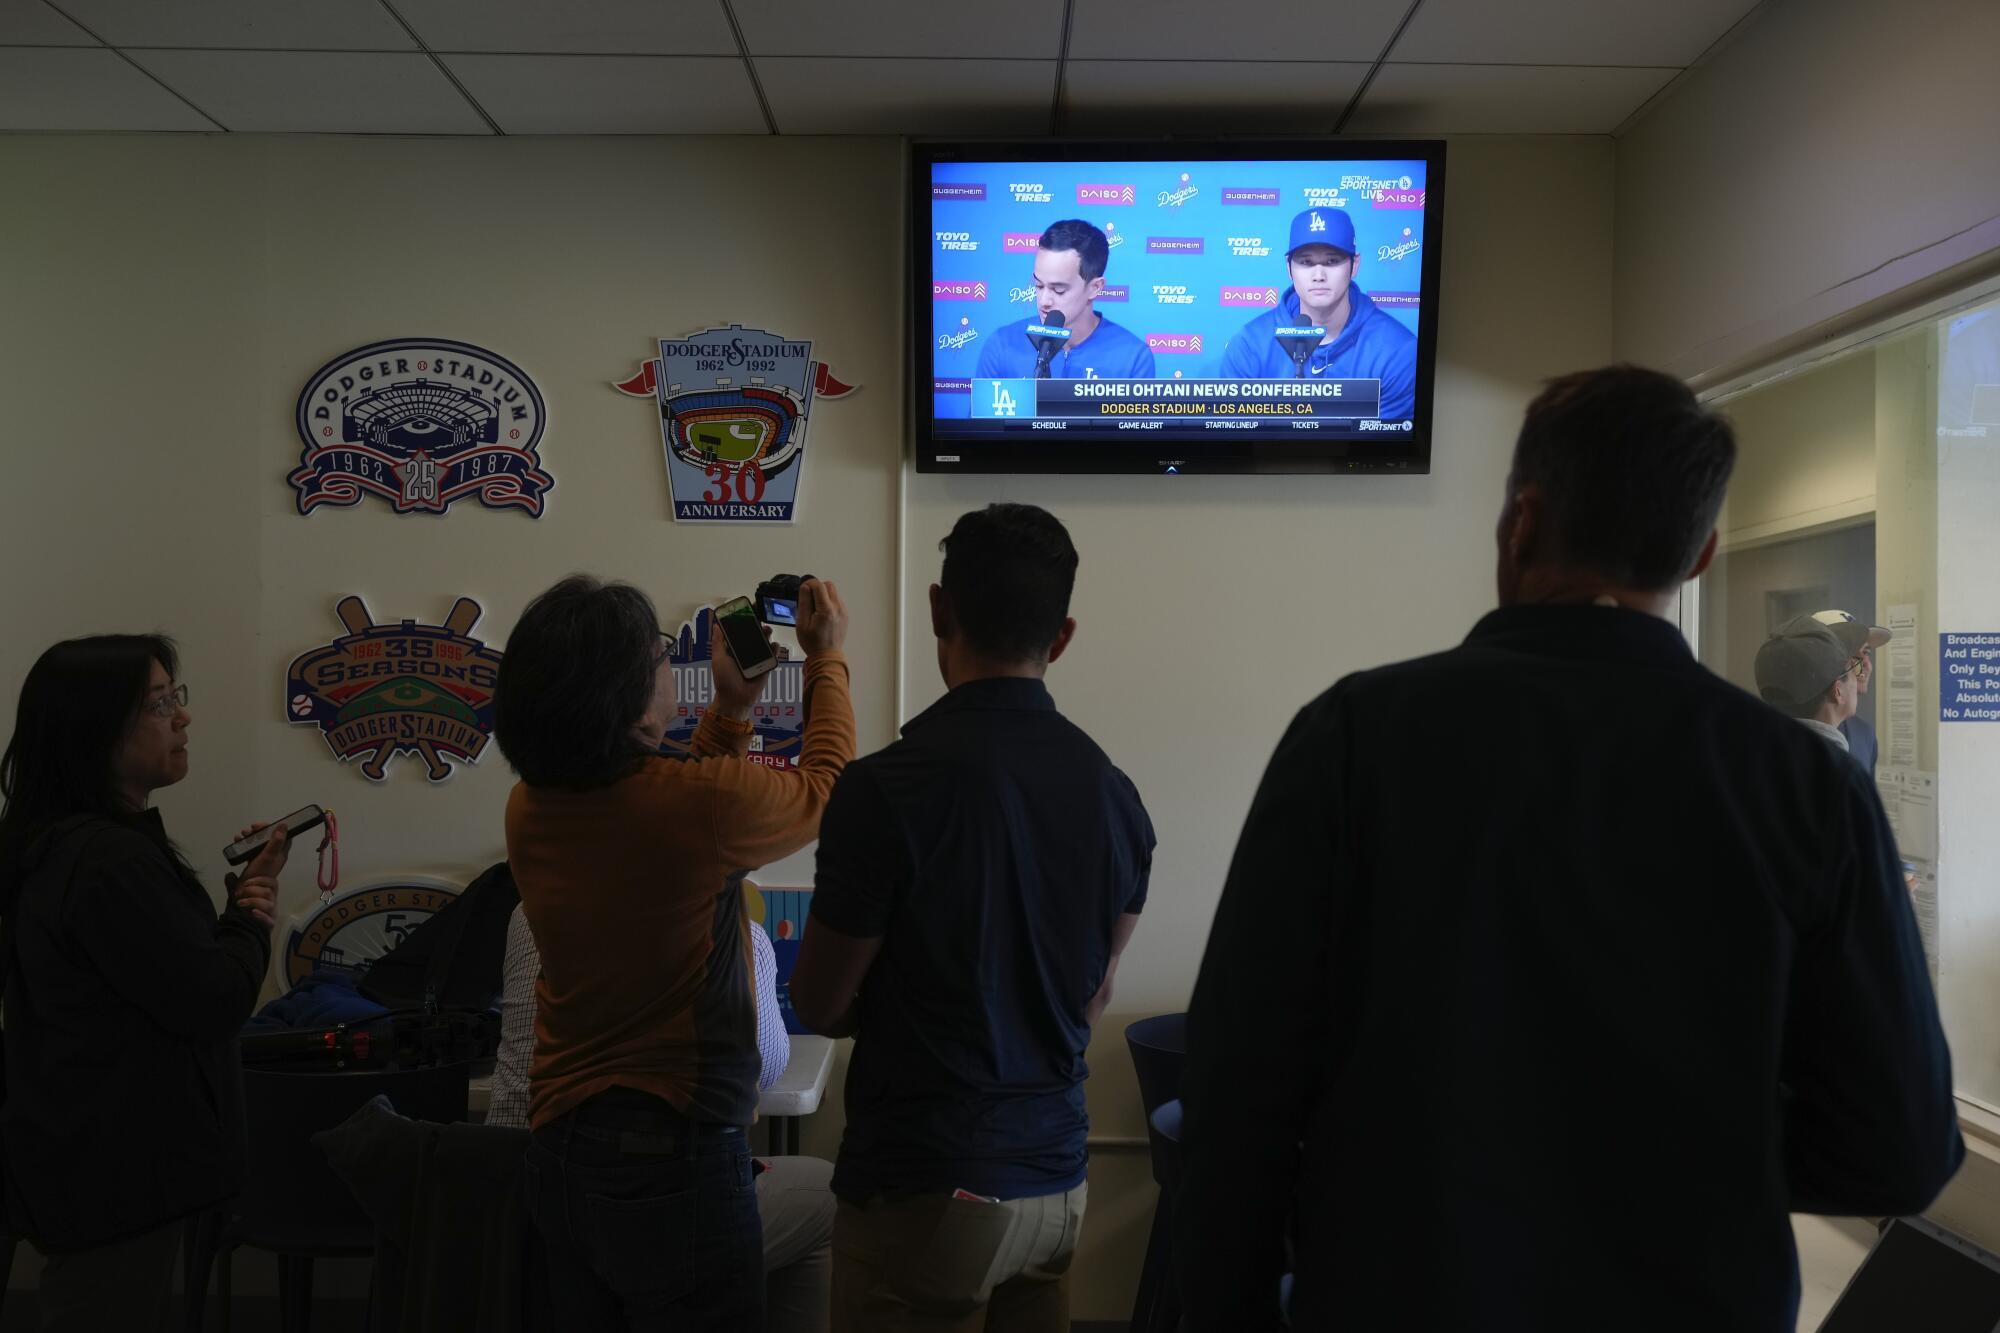 Reporters watch the TV showing Dodgers star Shohei Ohtani, right, and his new interpreter, Will Ireton, at a news conference.